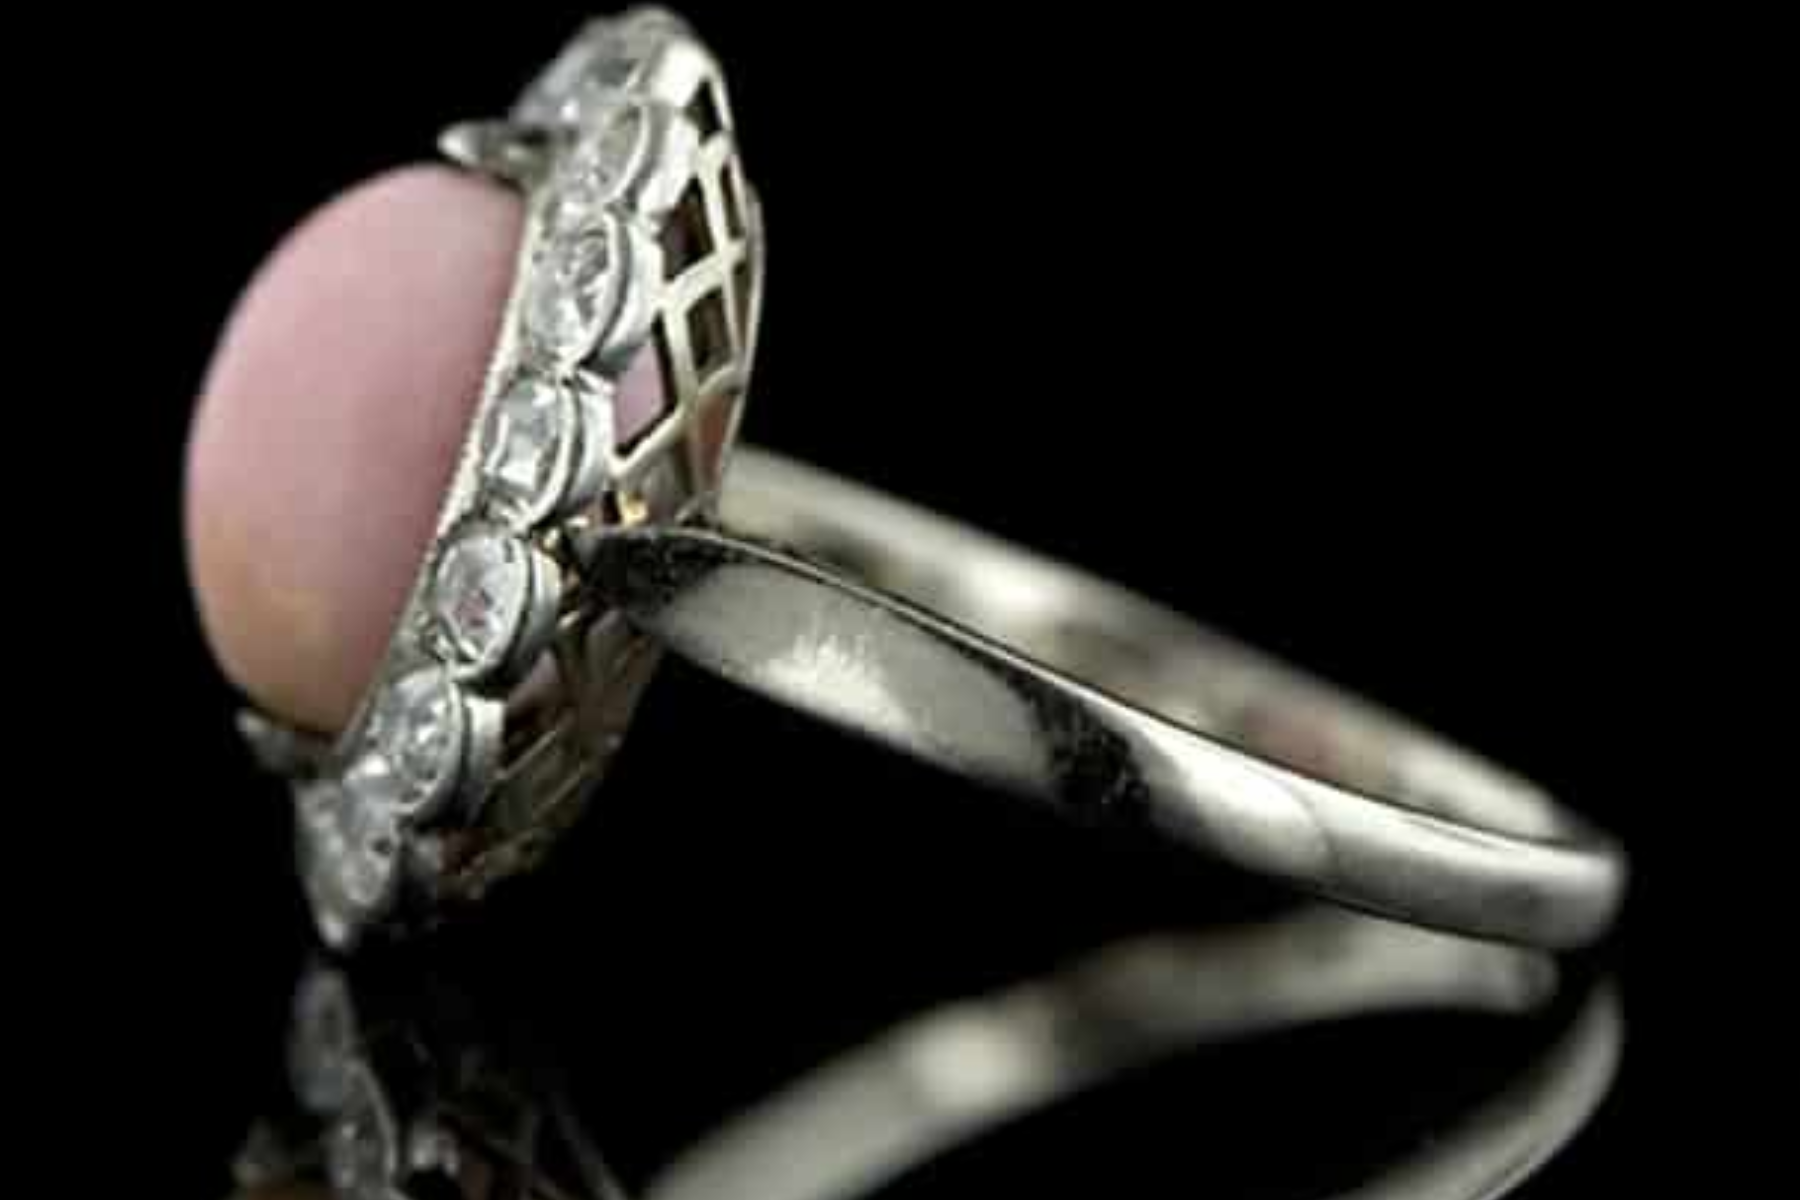 Vintage Platinum Jewelry - Why It's A Wise Choice For Your Jewelry Collection